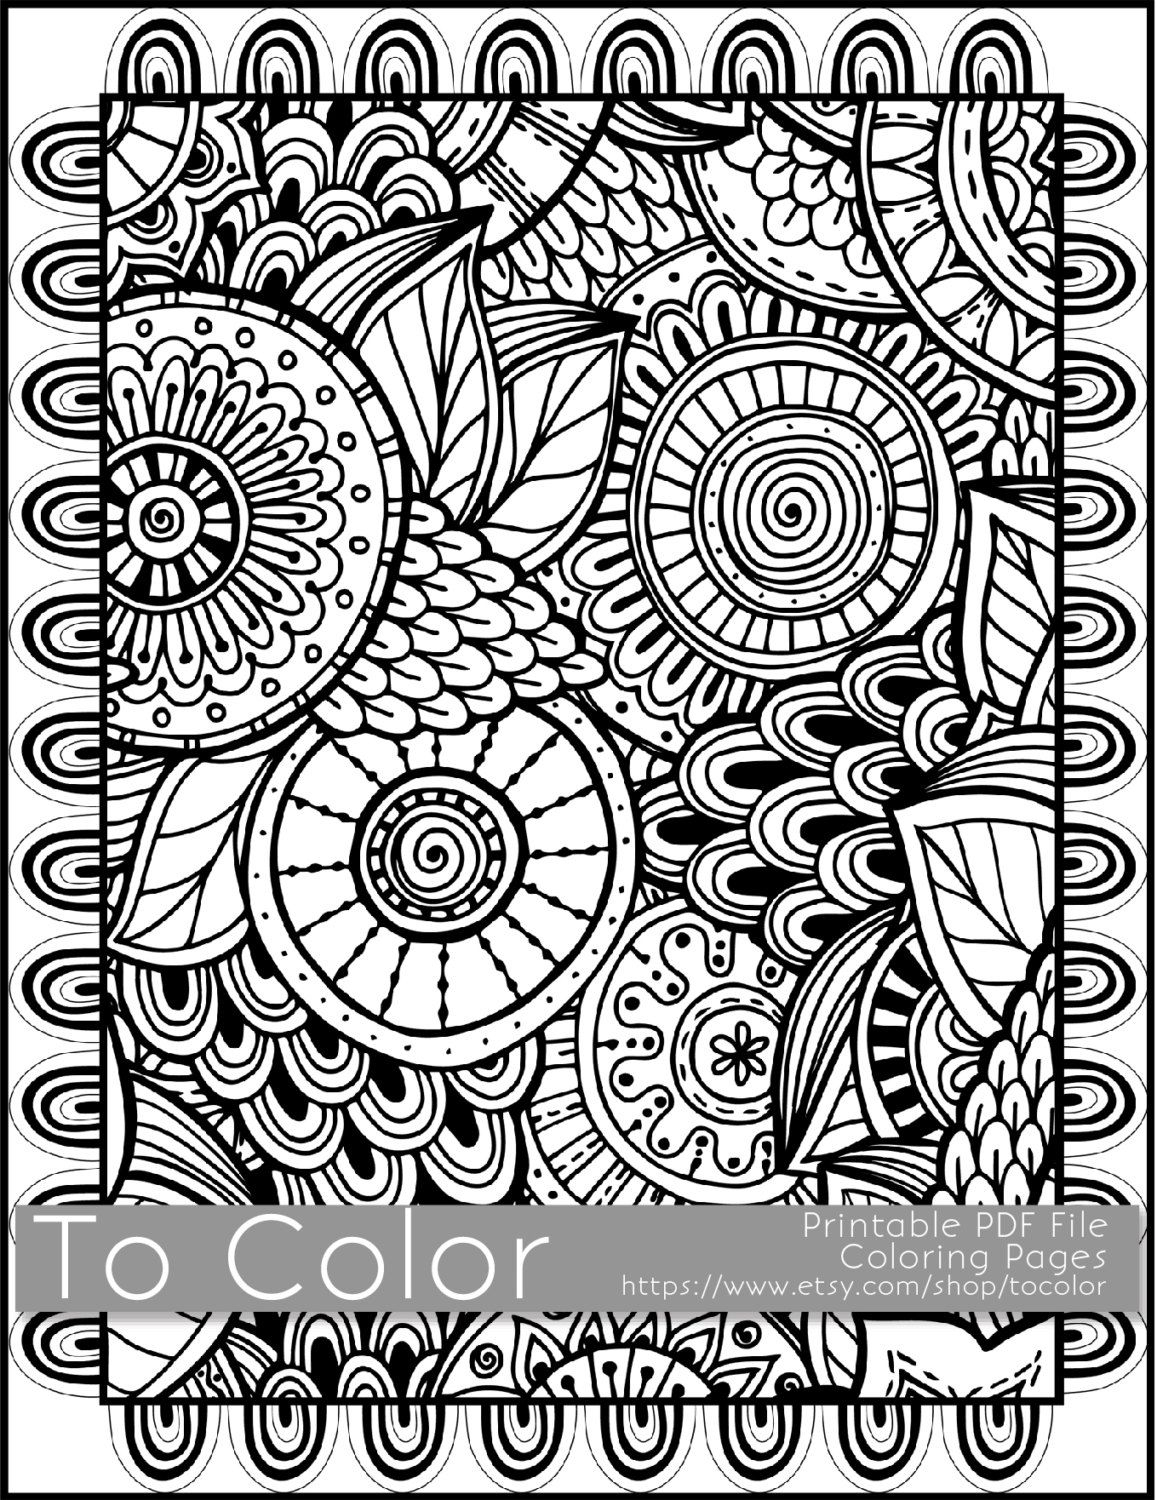 Pinkate Pullen On Free Coloring Pages For Coloring Fans - Free Printable Doodle Patterns